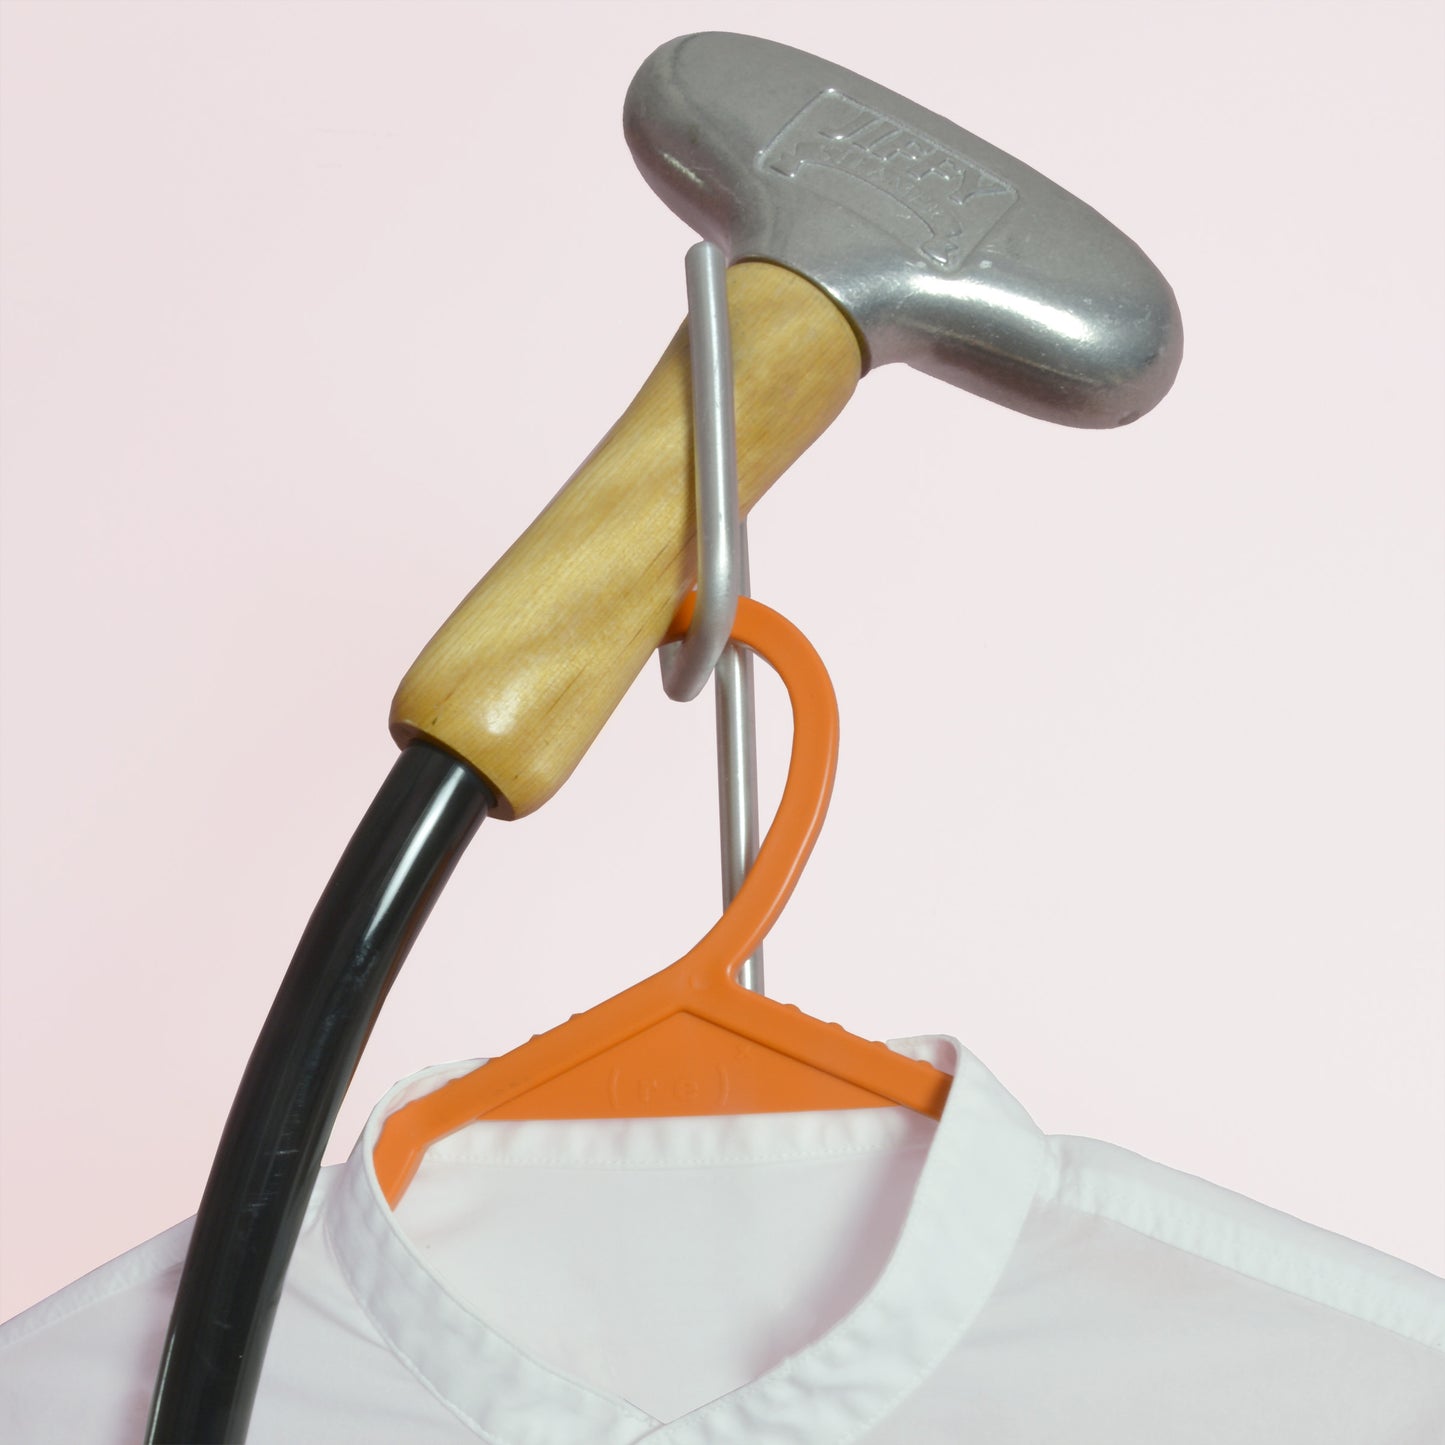 A close up of a Jiffy metal steam head perched on the built-in head rest; underneath is a white collarless shirt hanging from an orange hanger